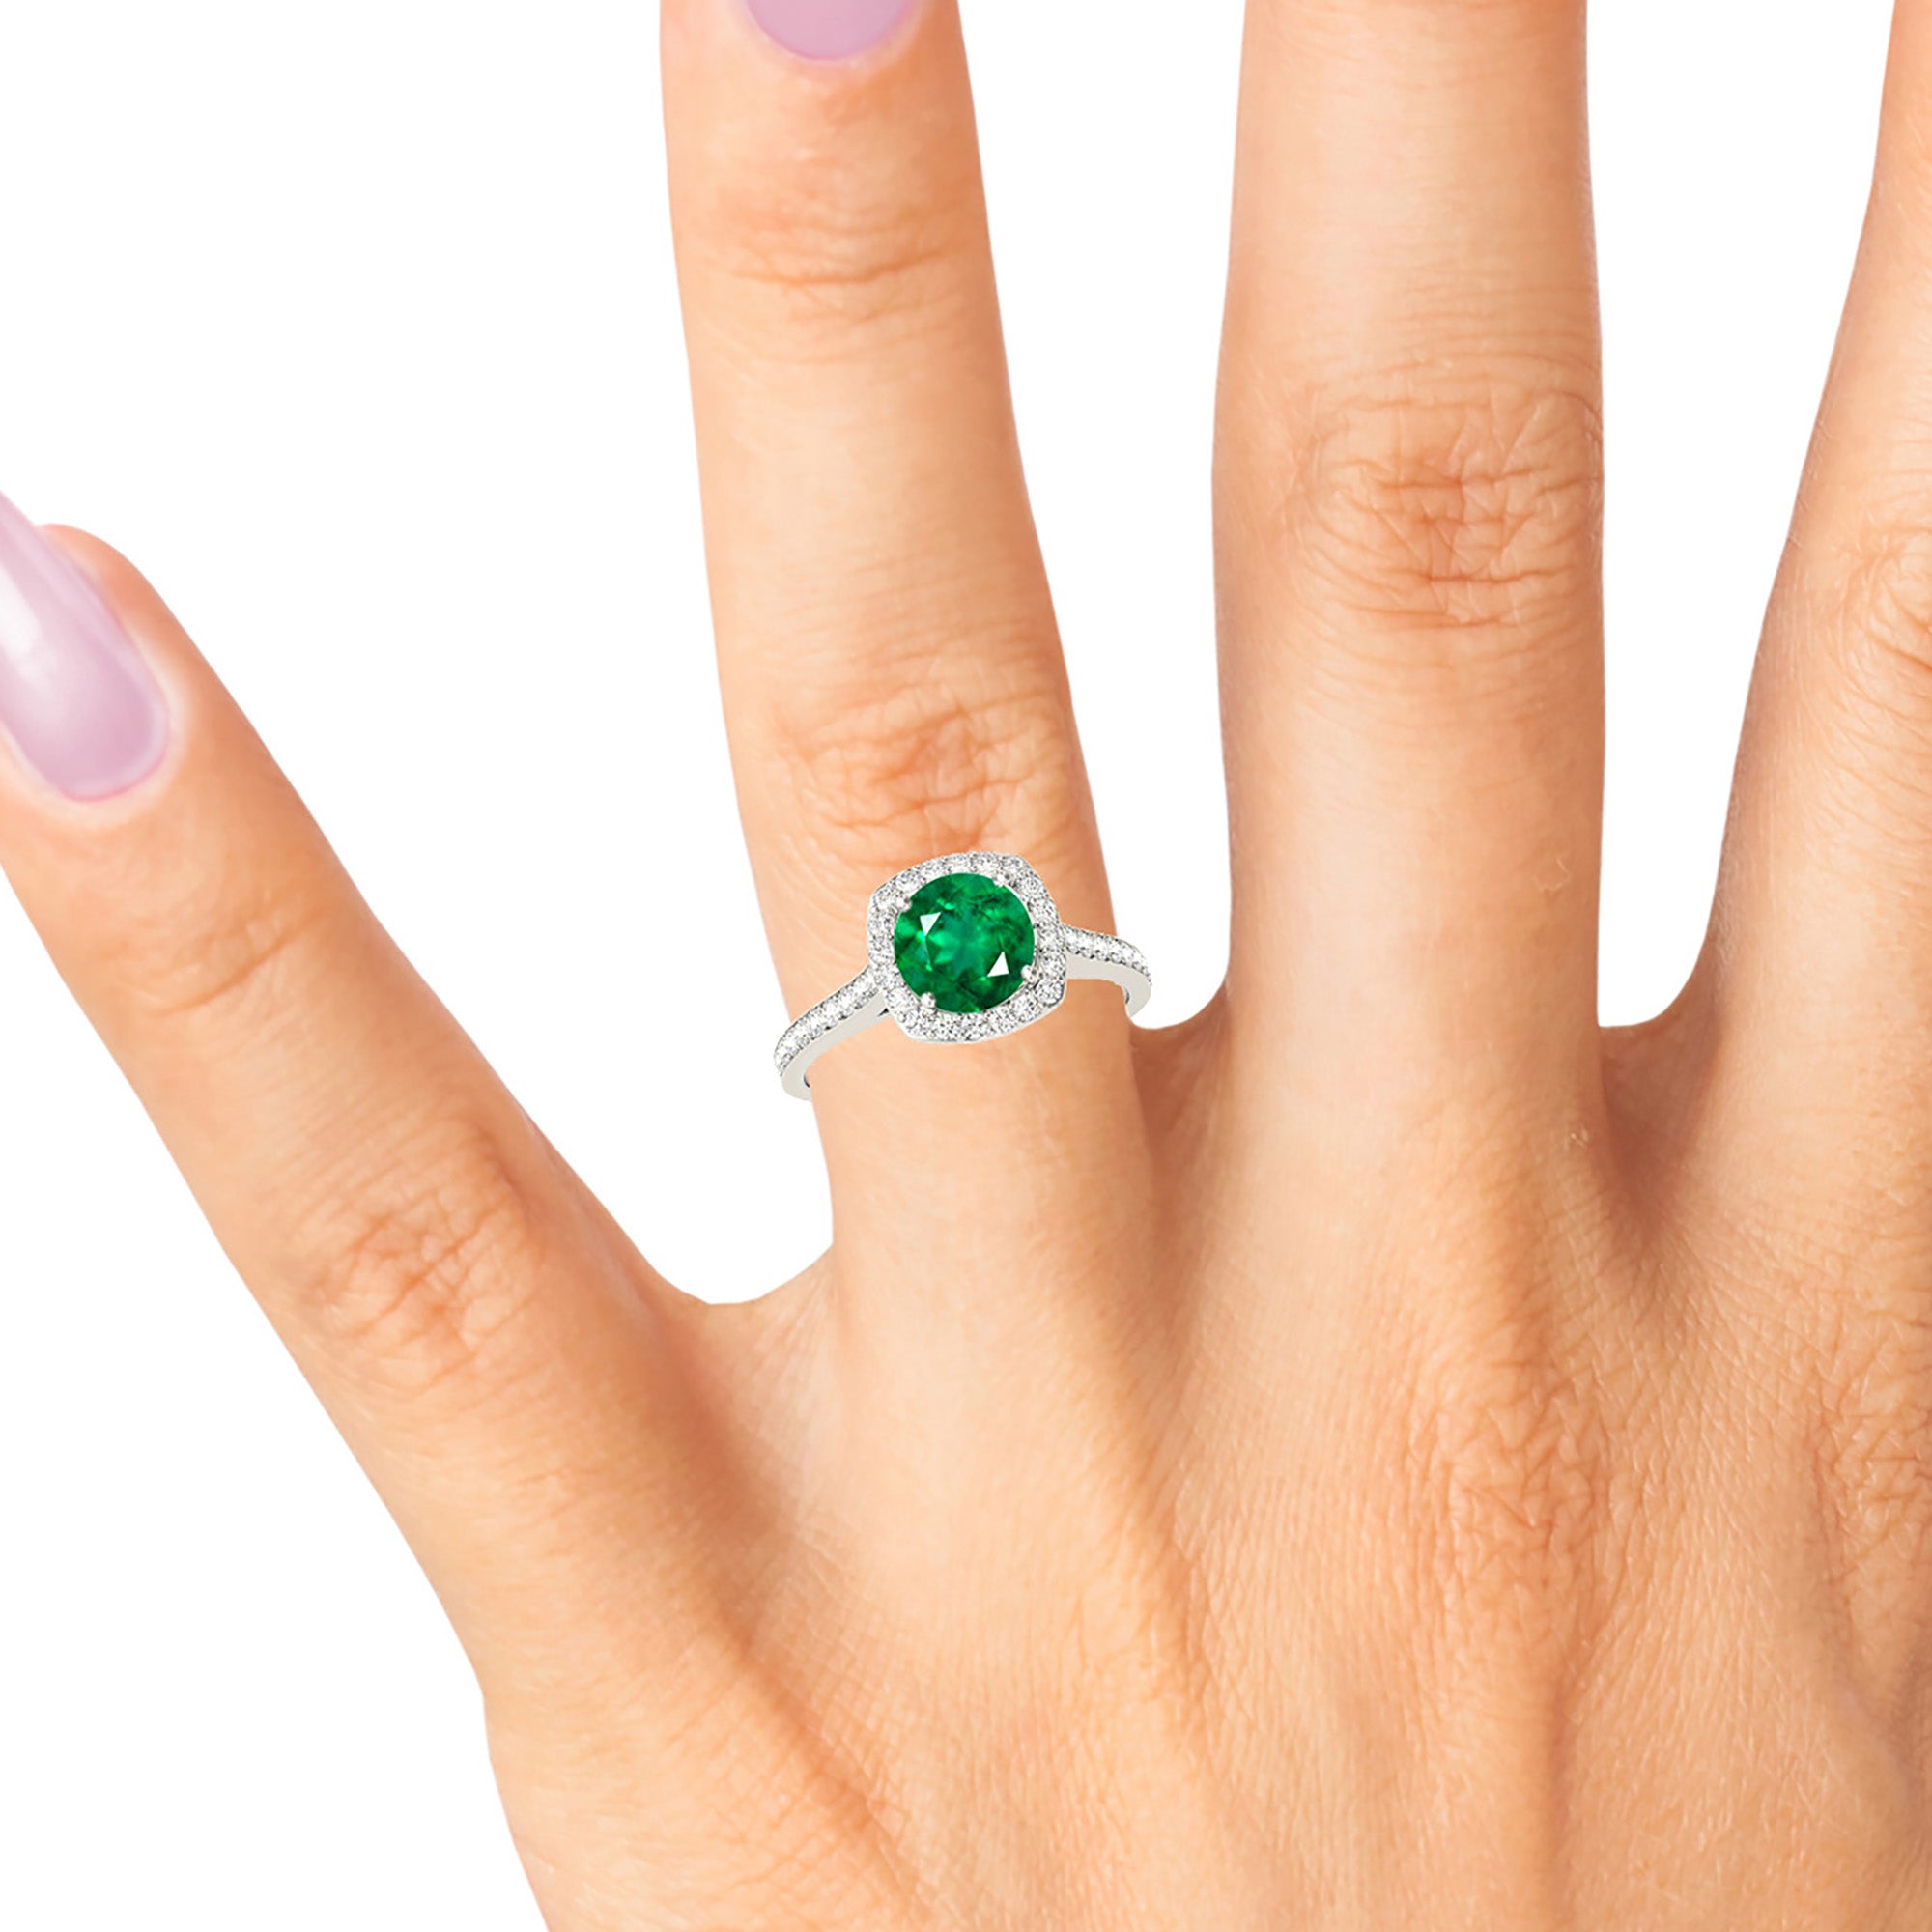 1.68 ct. Genuine Emerald Ring With 0.35 ctw. Diamond Halo and Delicate Diamond Band-in 14K/18K White, Yellow, Rose Gold and Platinum - Christmas Jewelry Gift -VIRABYANI